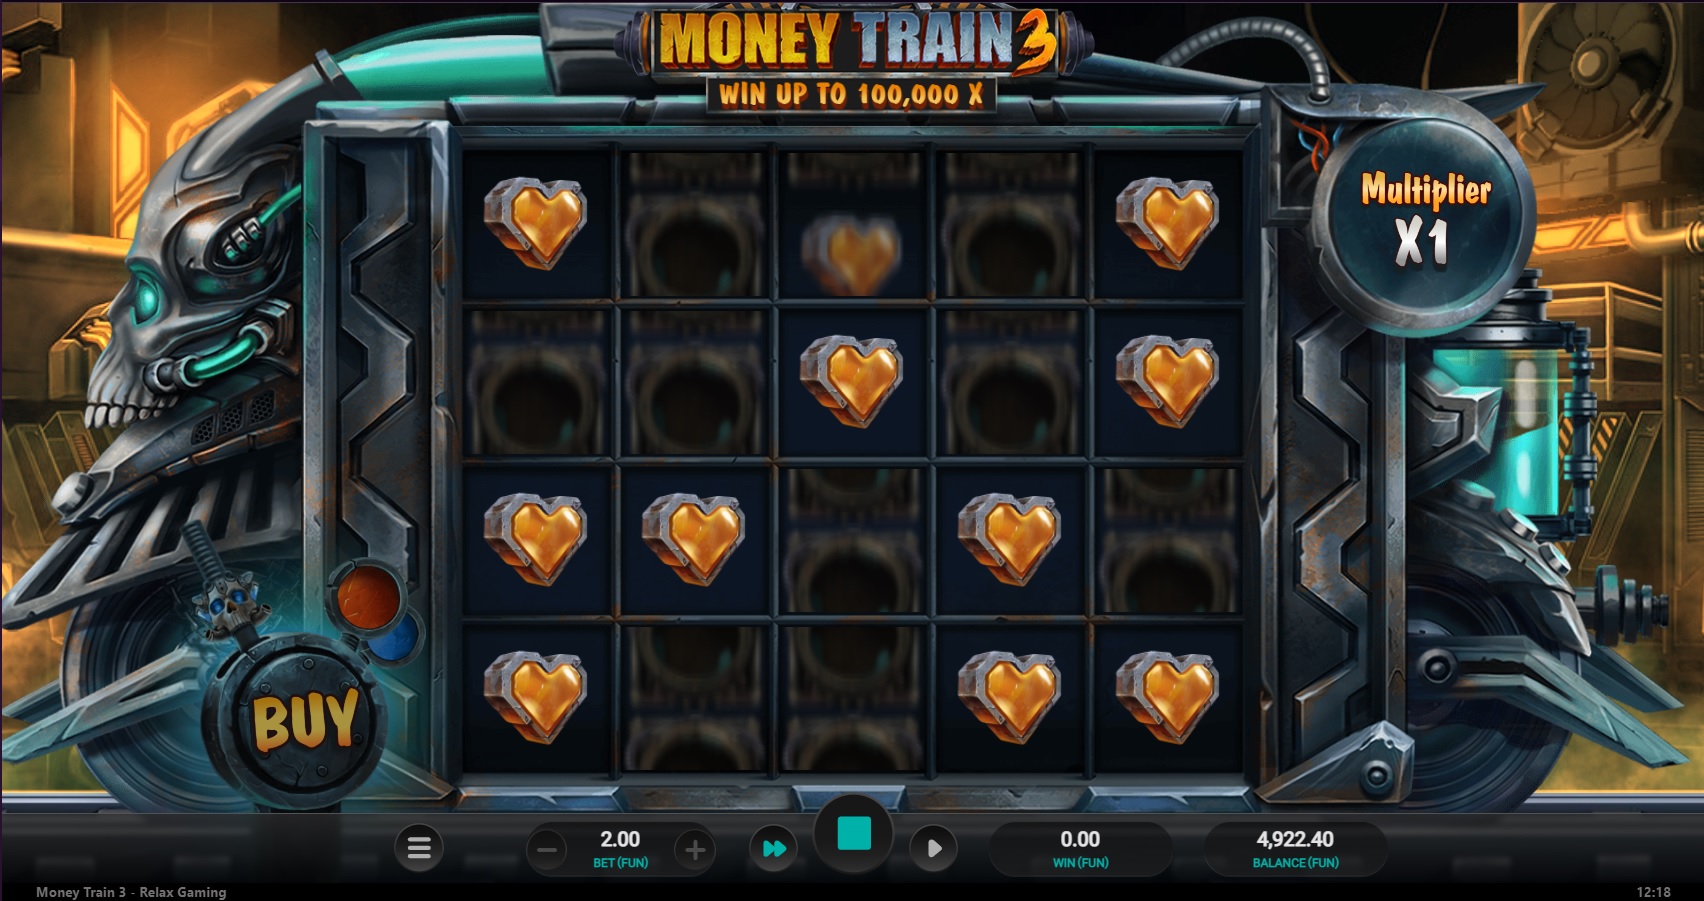 Money Train 3, Respin feature